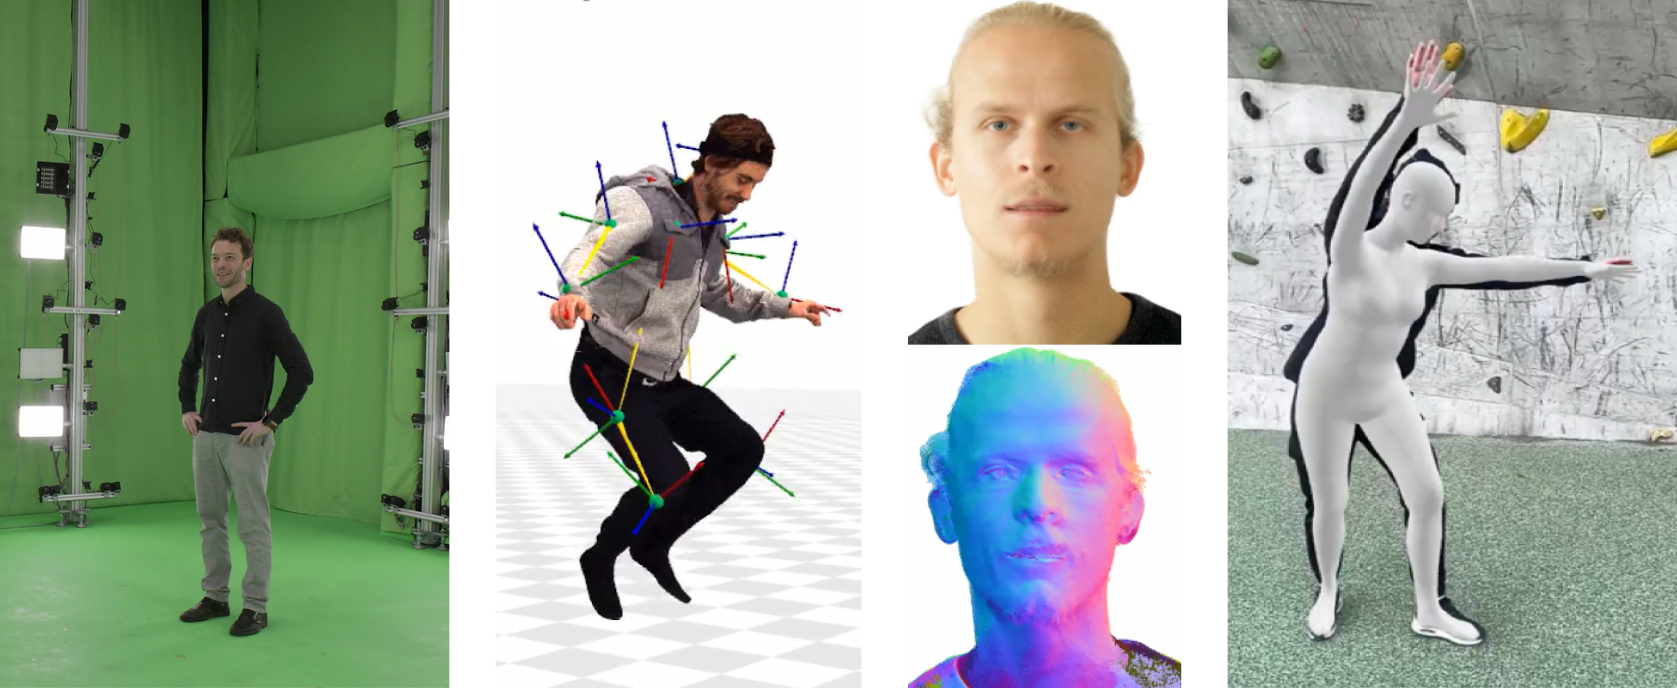 Teaser image for Human-Performance Capture course